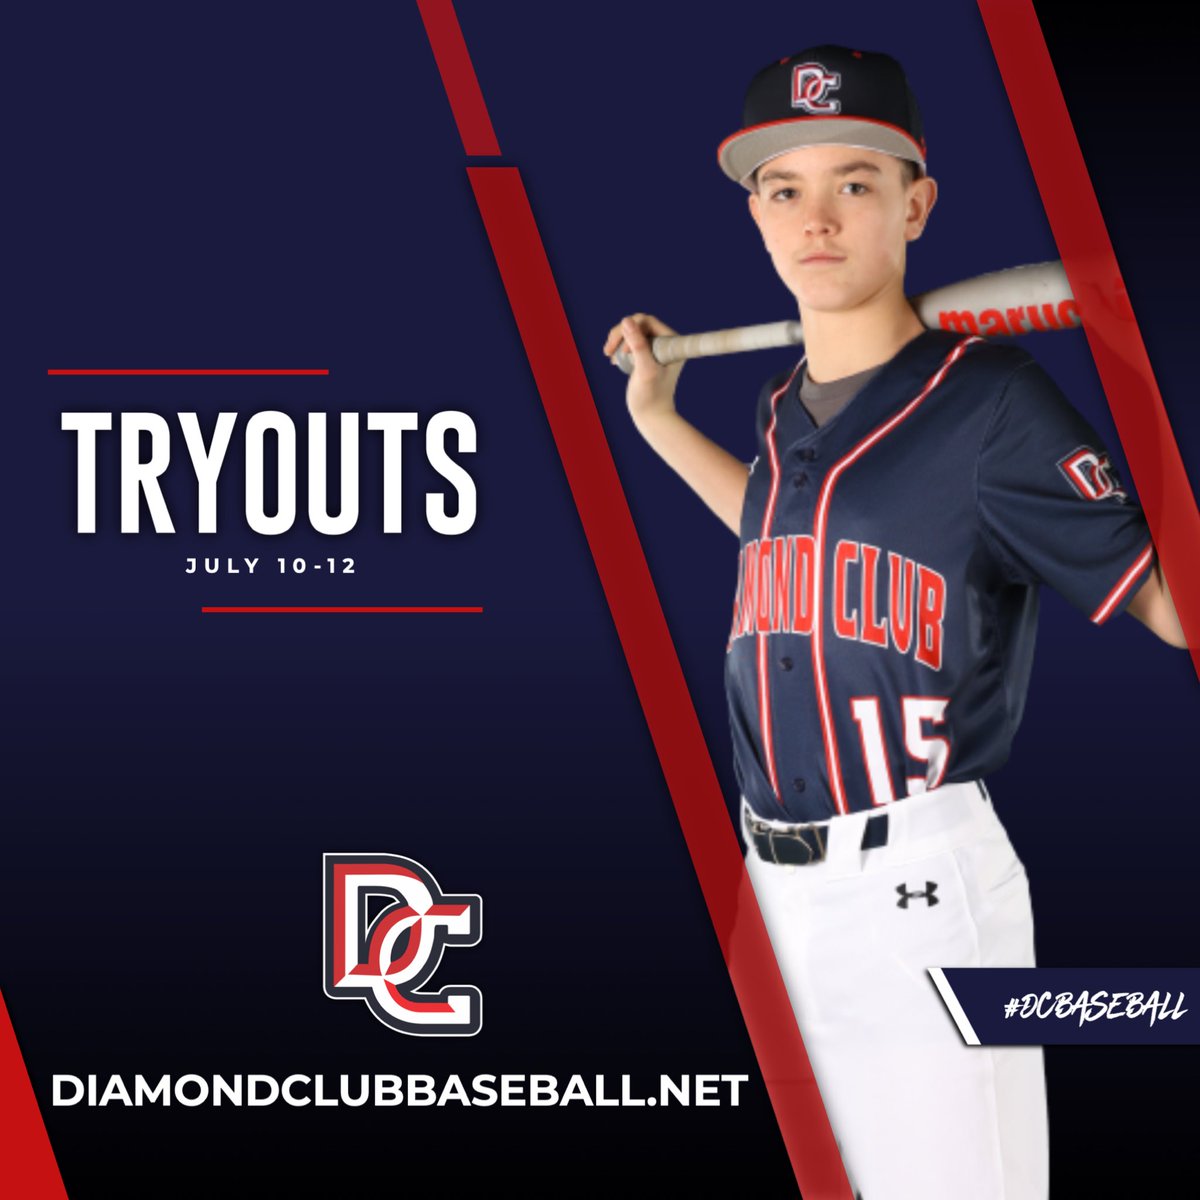 Youth tryouts start July 10th! Visit diamondclubbaseball.net for complete details. #colorado #youthbaseball #tryouts